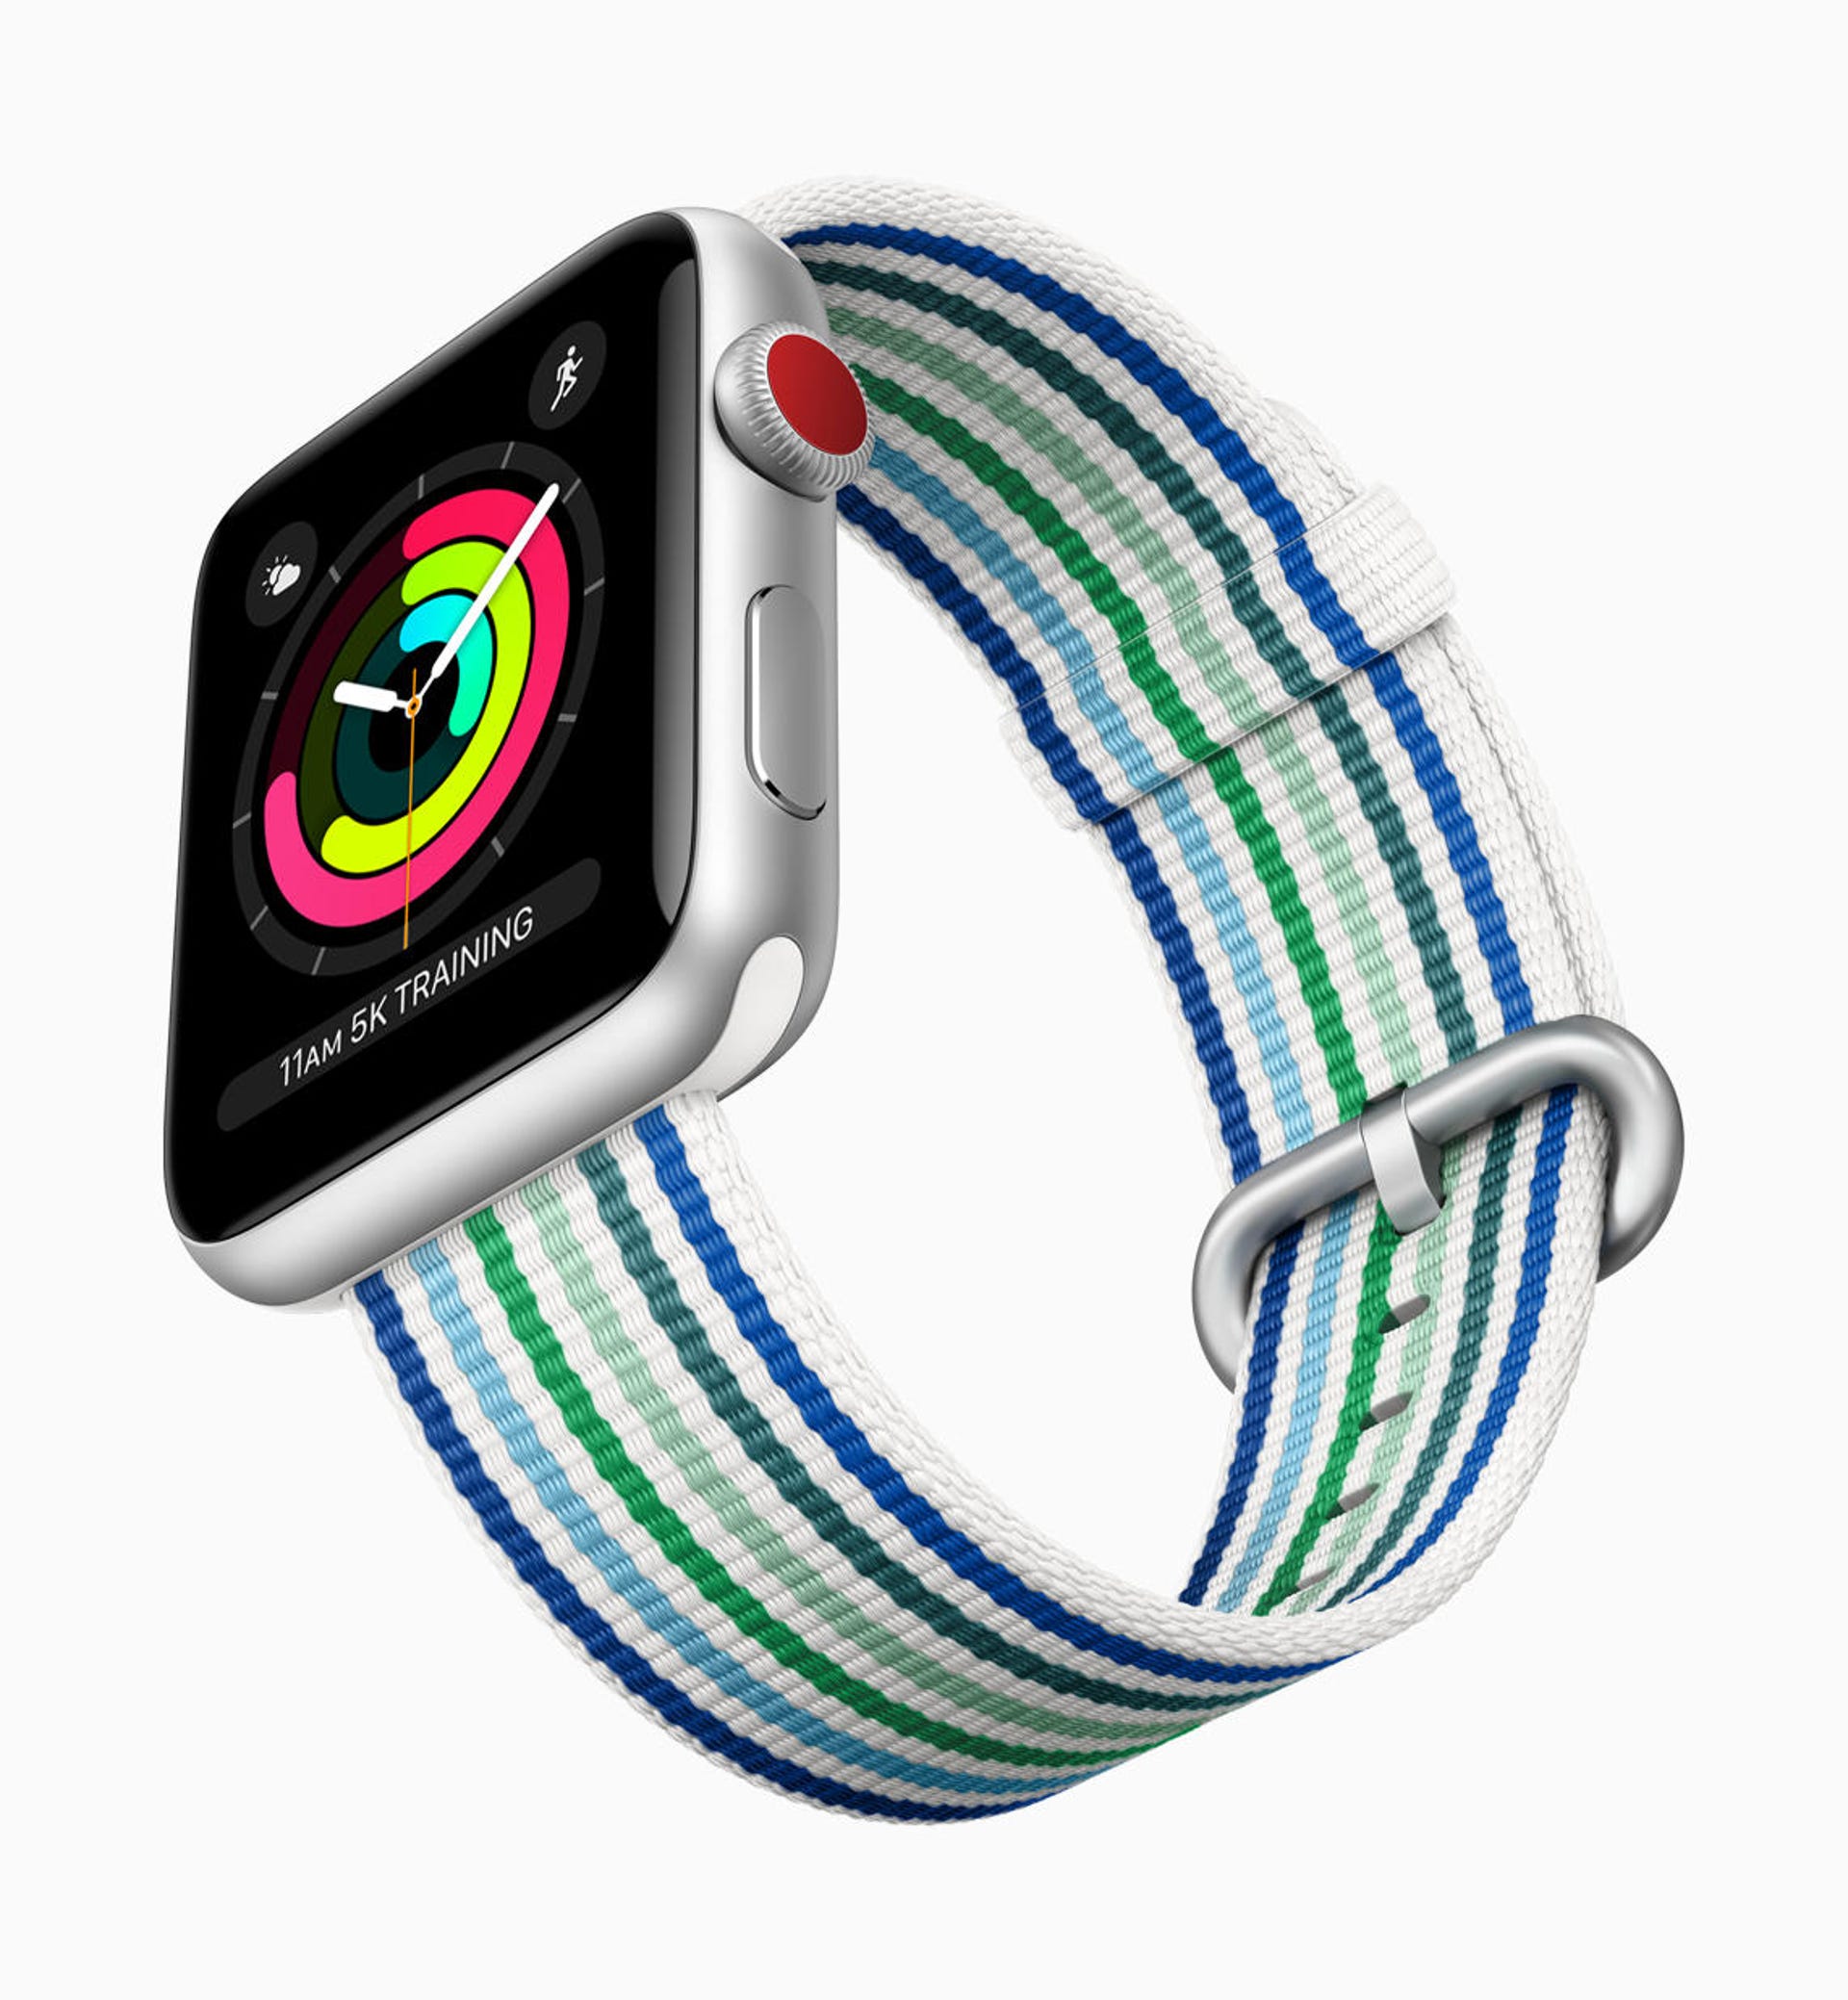 apple-watch-series3-spring-woven-bands-stripes-032118